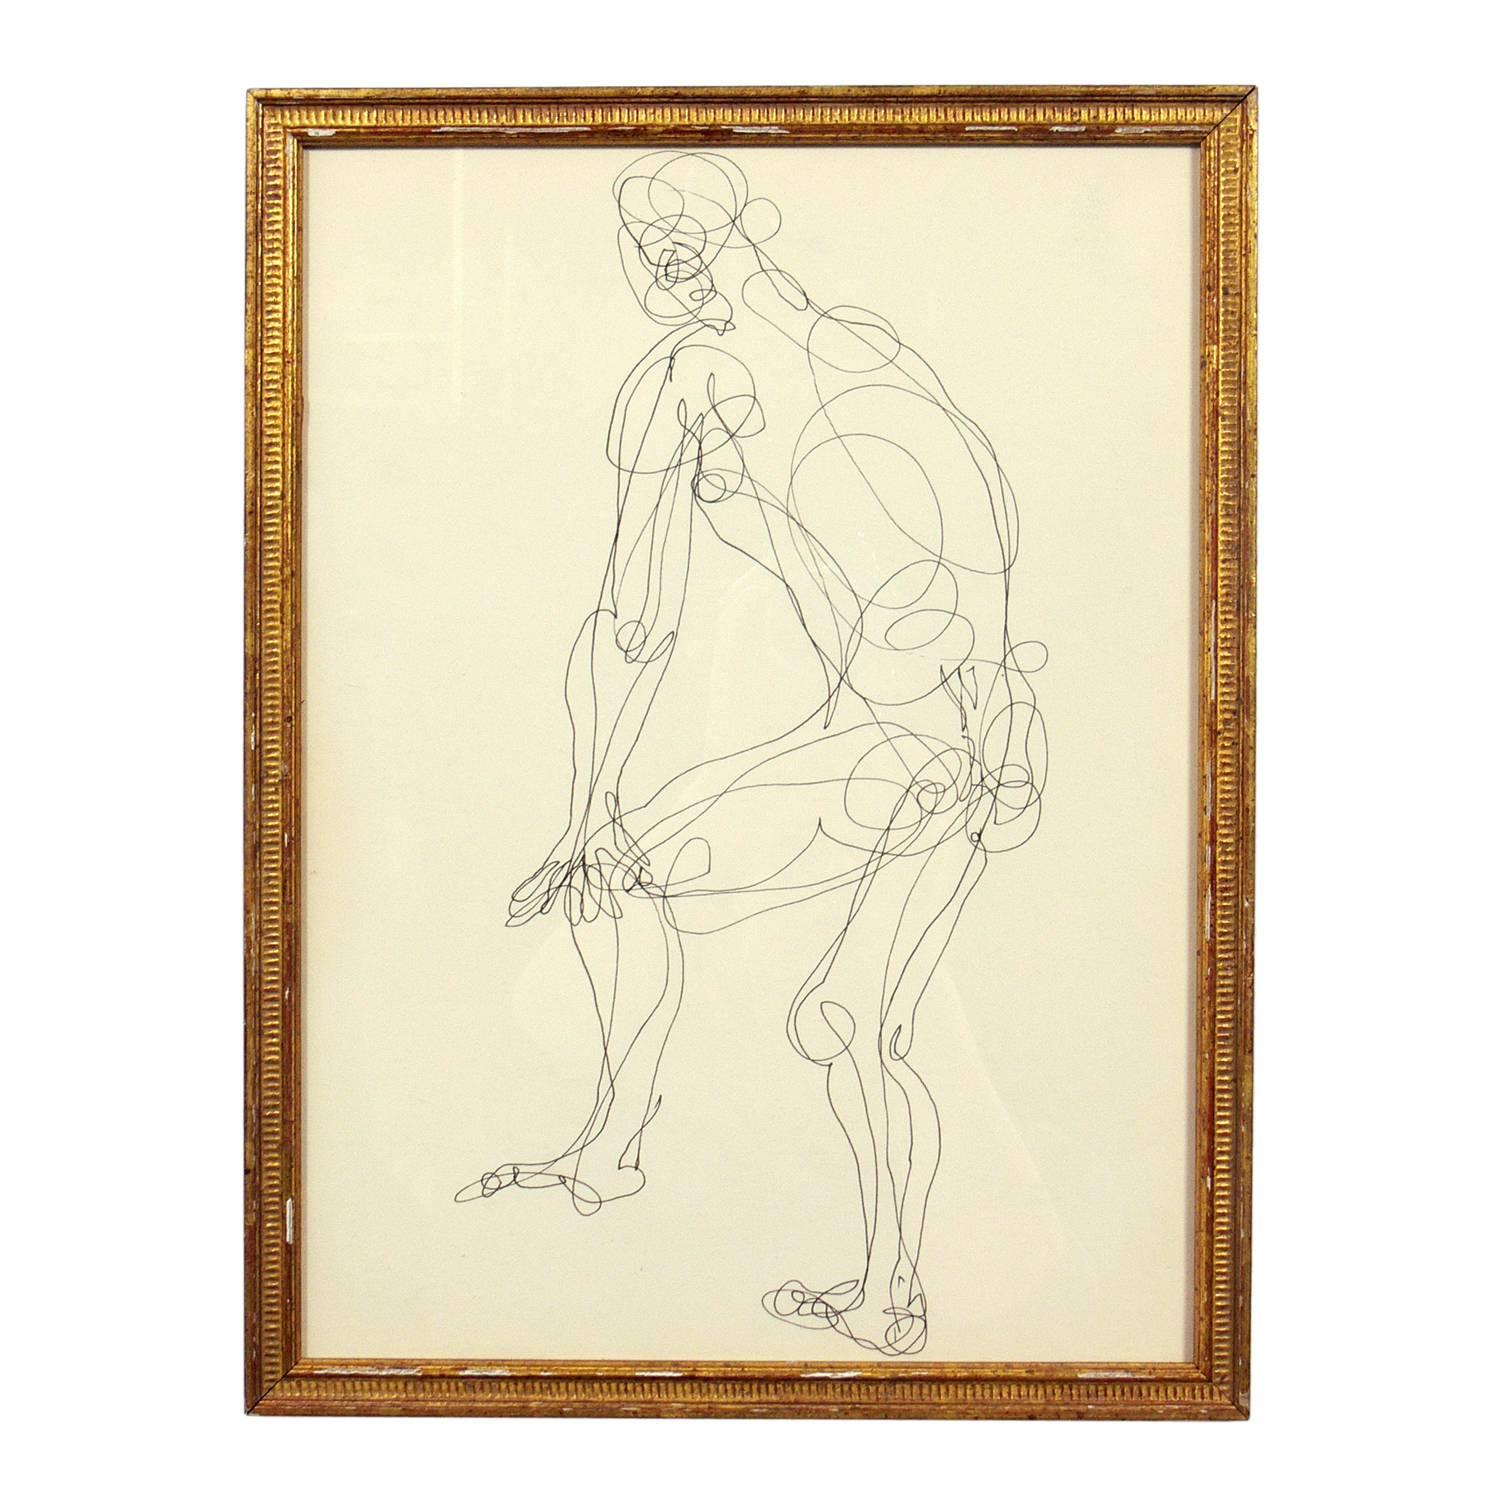 American Selection of Figural Line Drawings or Gallery Wall by Miriam Kubach